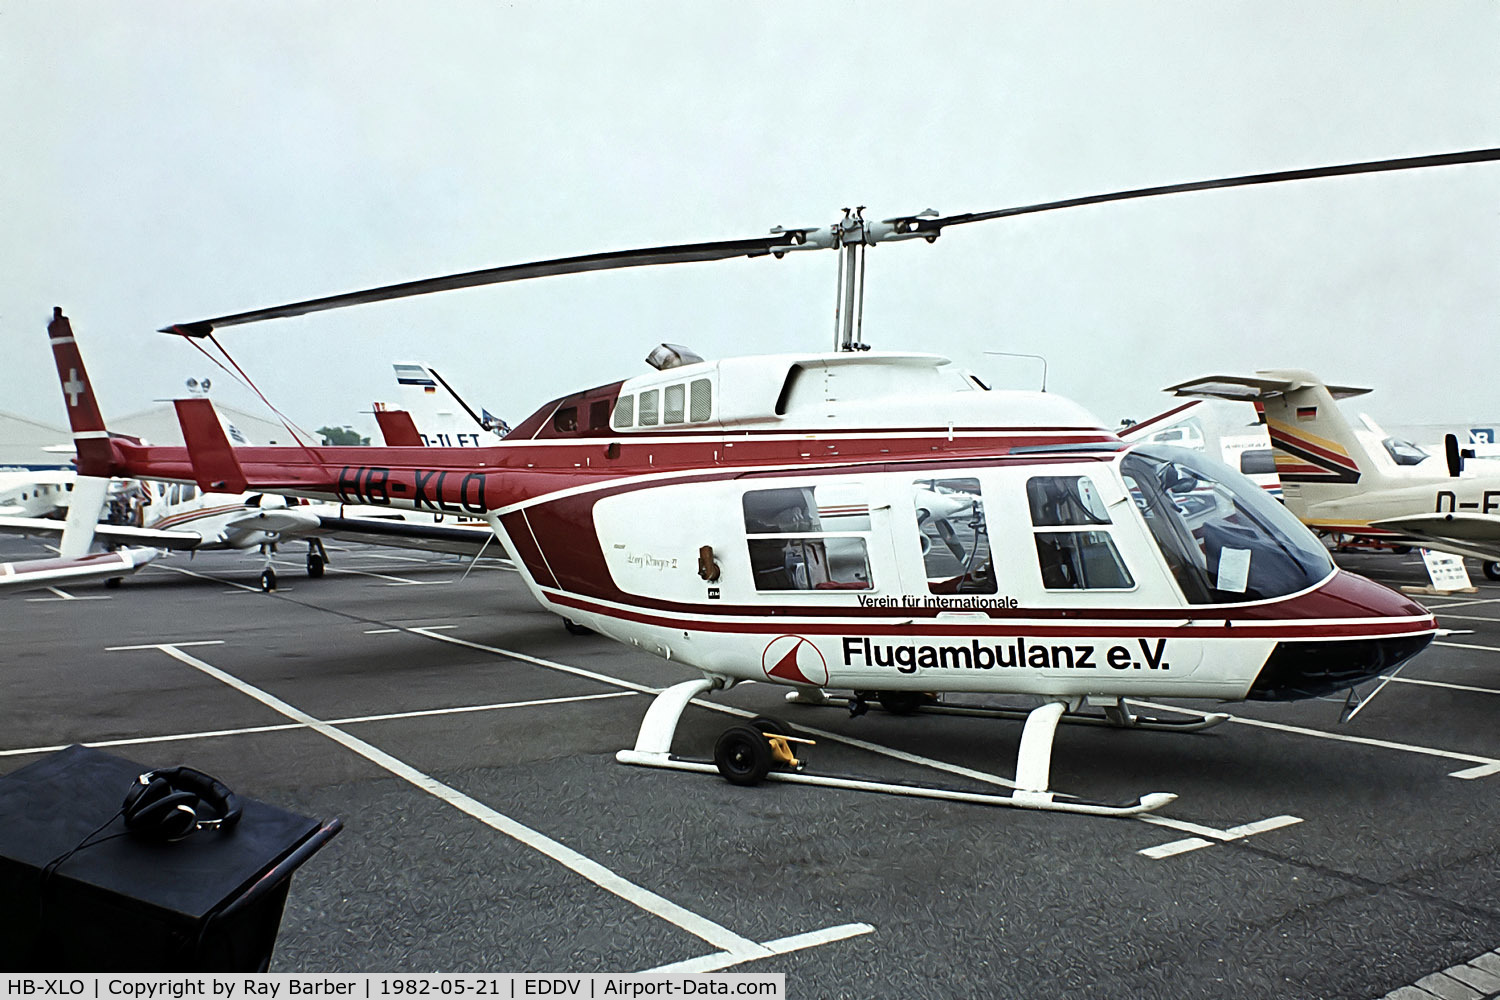 HB-XLO, Bell 206L-1 LongRanger II C/N 45456, HB-XLO   Bell Helicopters 206 L-1 [45456] Hannover~D 21/05/1982. From a slide.